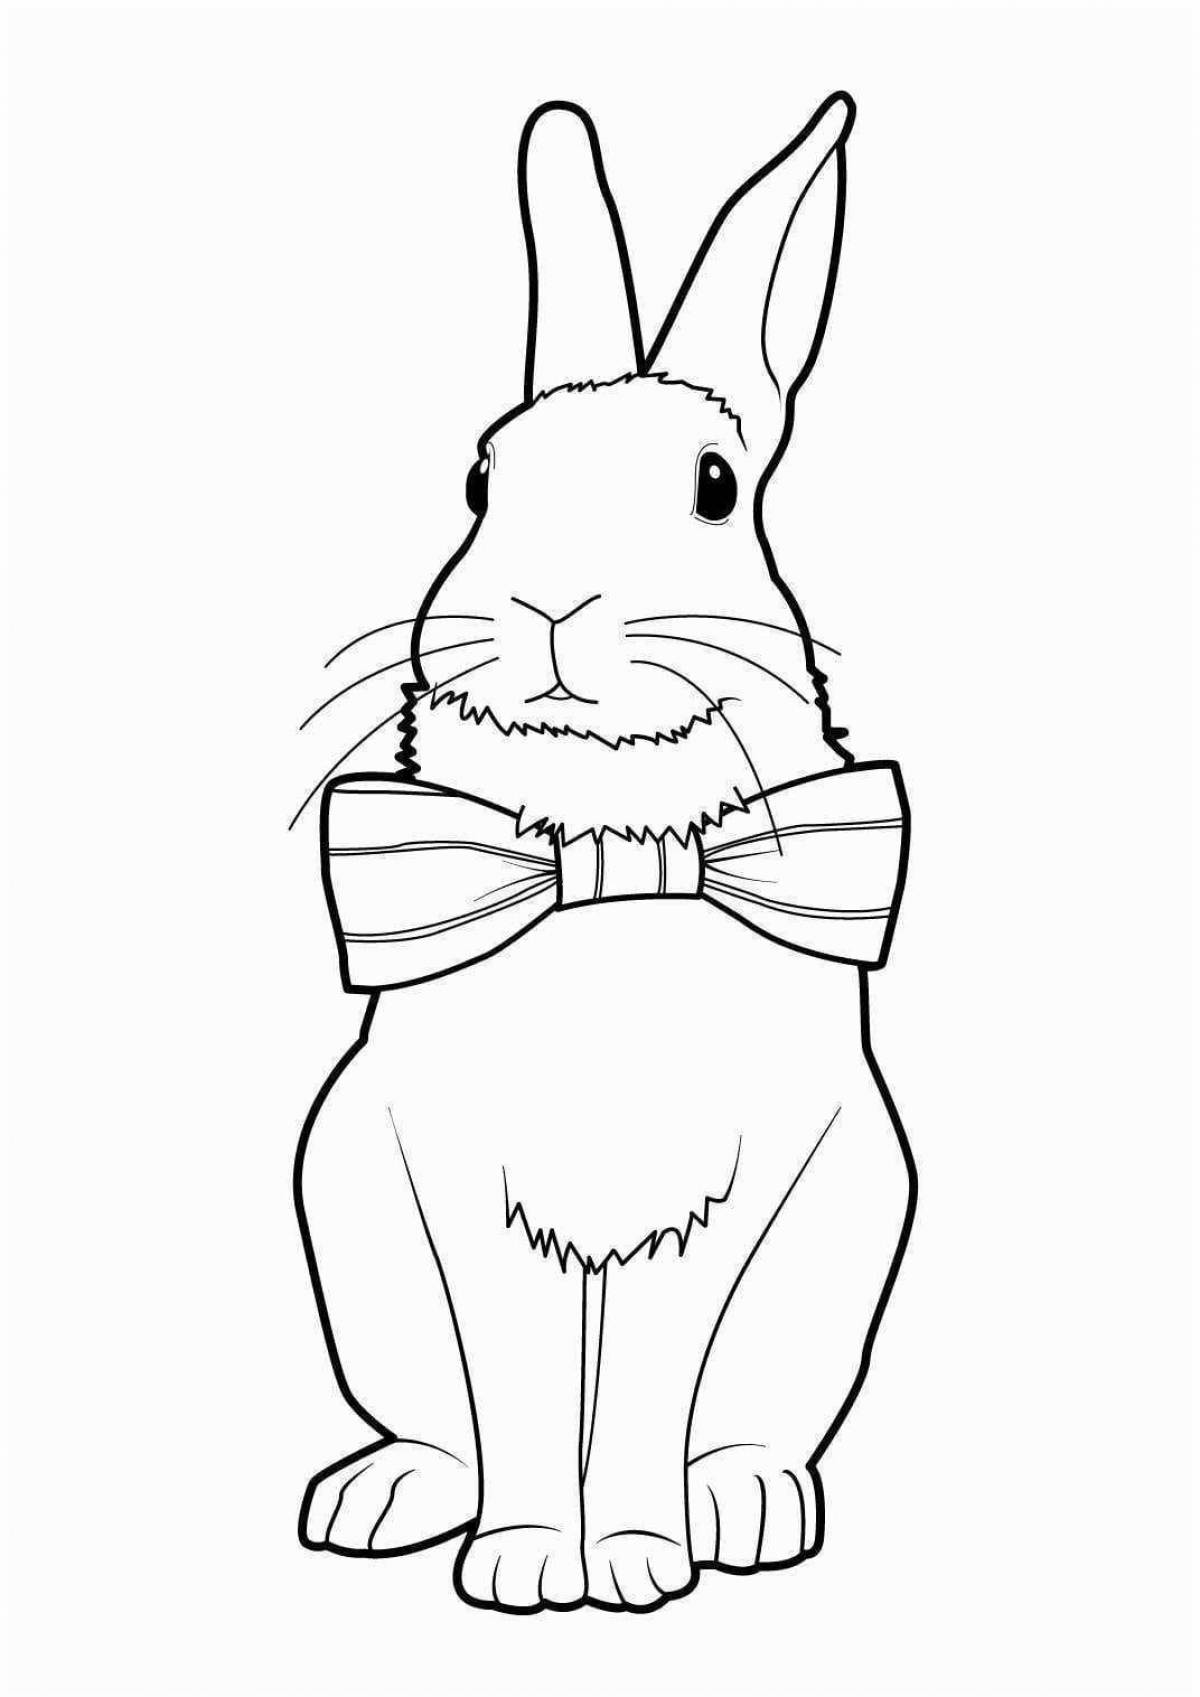 Coloring book glamorous year of the rabbit